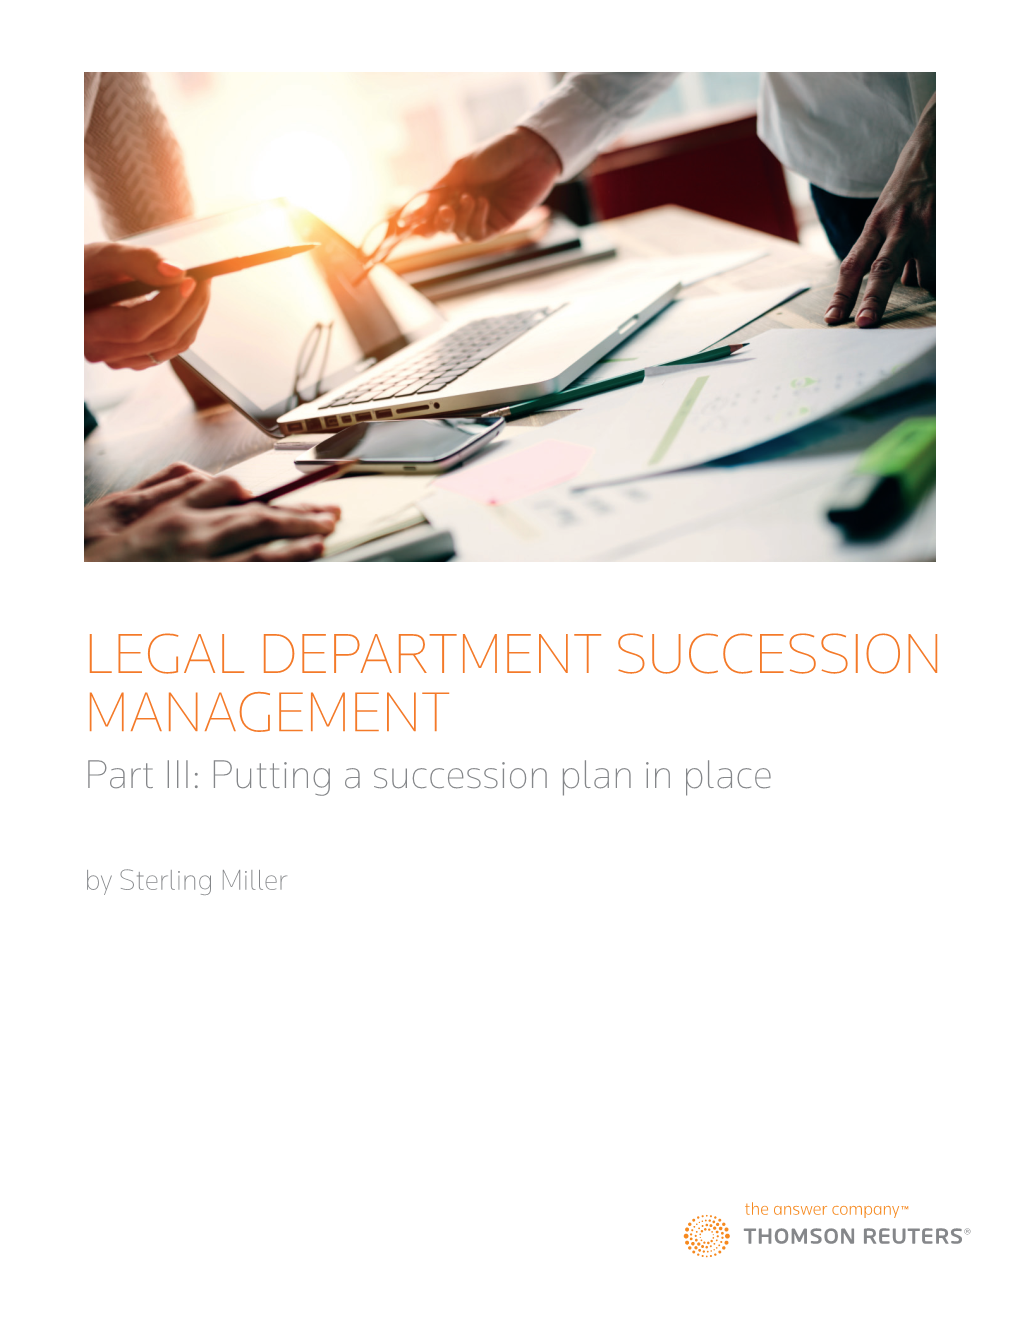 LEGAL DEPARTMENT SUCCESSION MANAGEMENT Part III: Putting a Succession Plan in Place by Sterling Miller PART III: PUTTING a SUCCESSION PLAN in PLACE